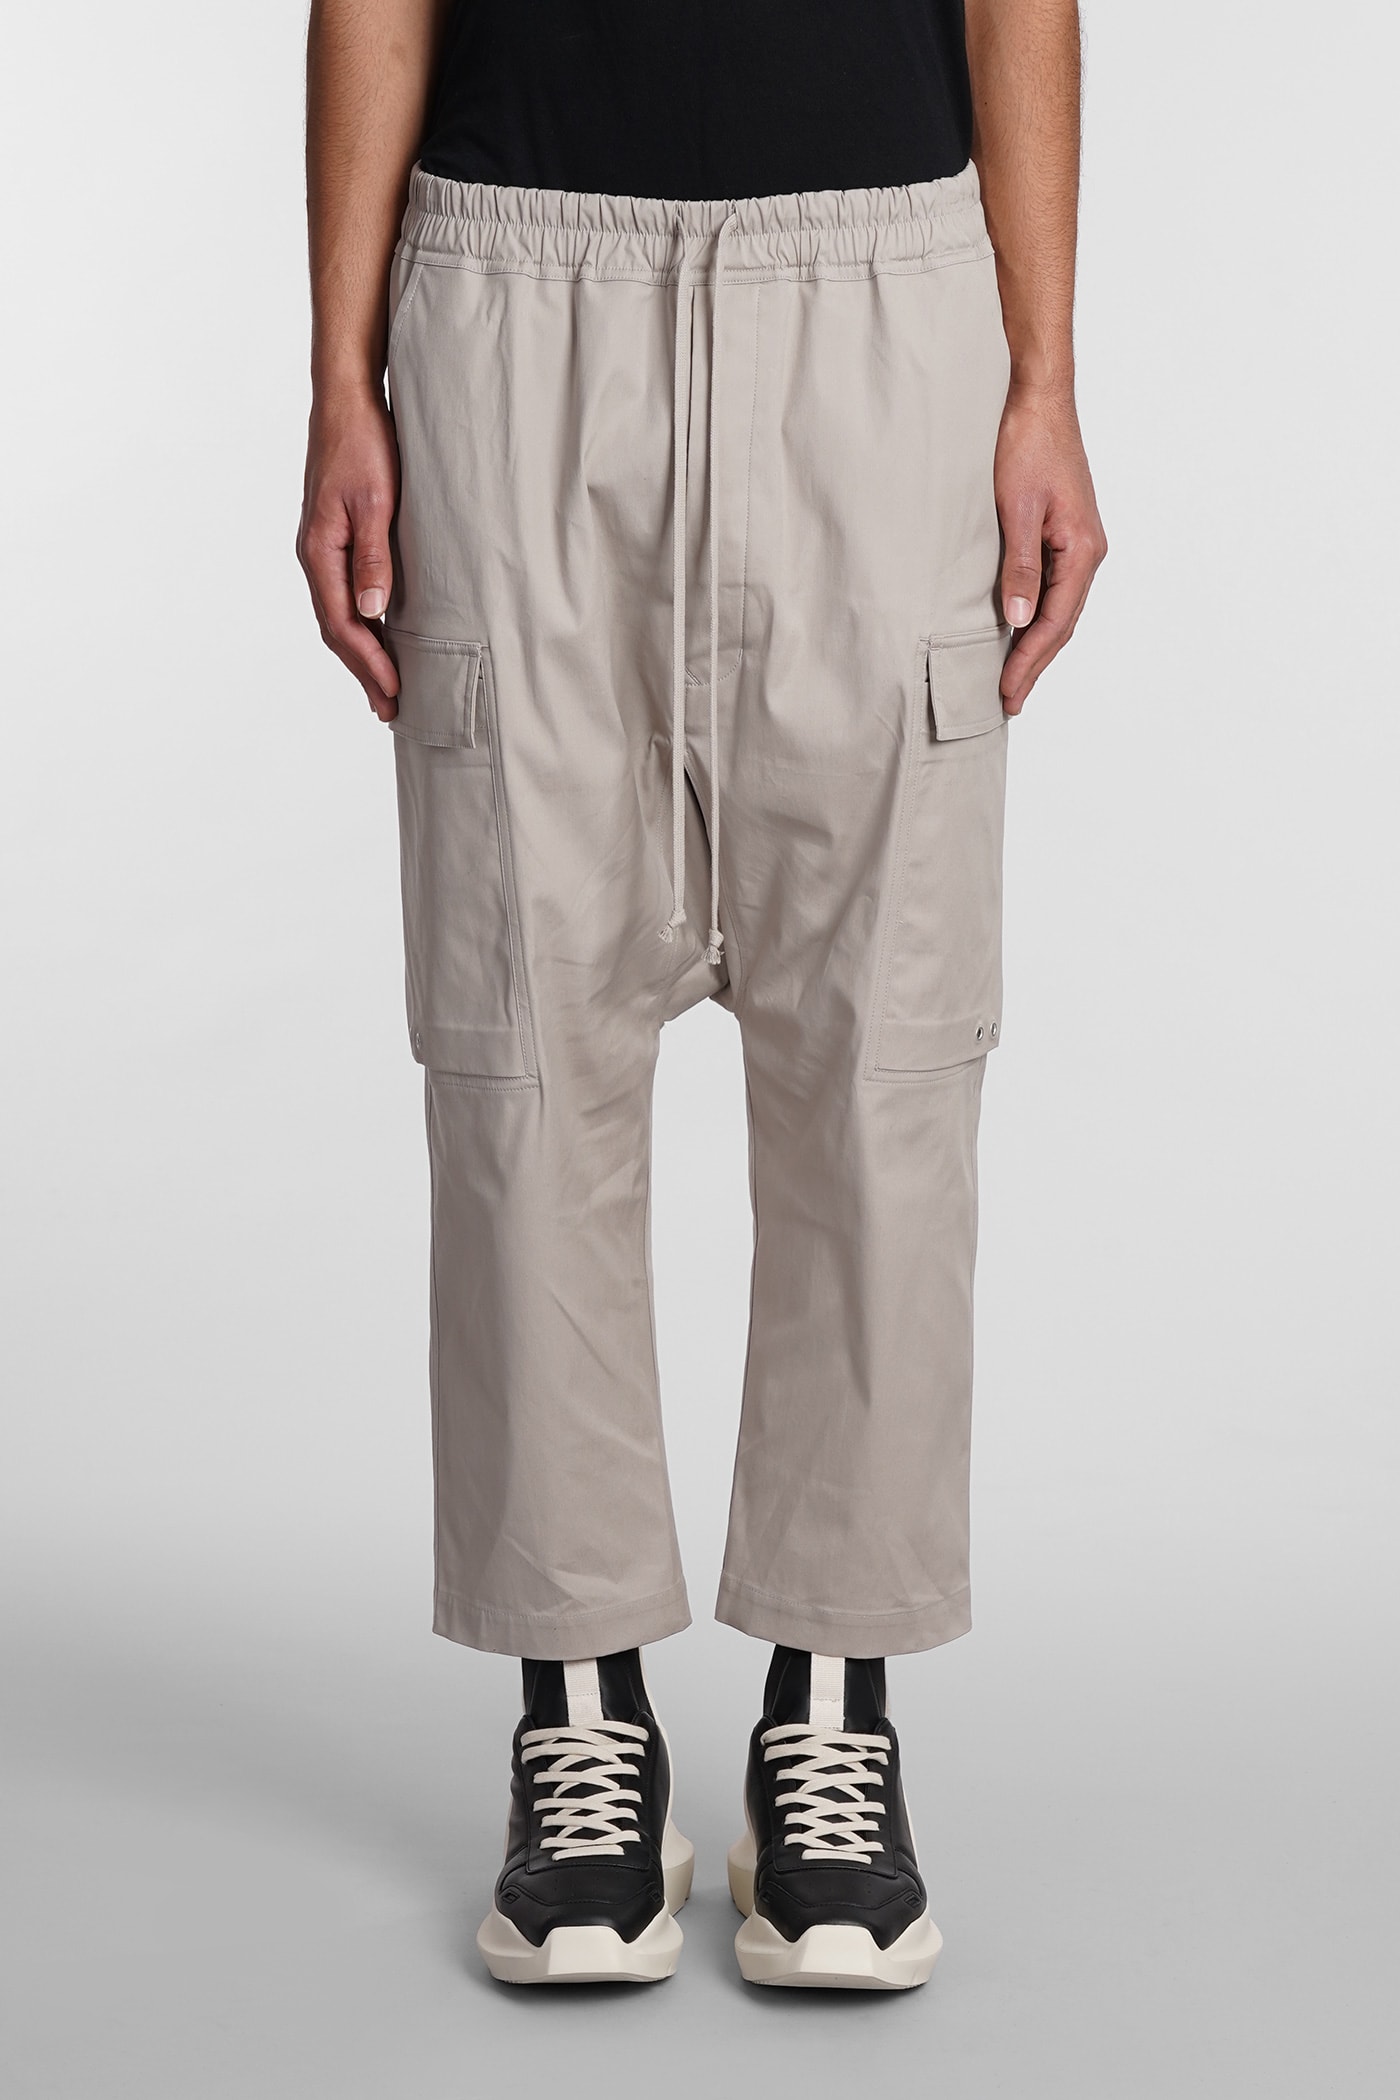 RICK OWENS CARGO CROPPED PANTS IN BEIGE COTTON